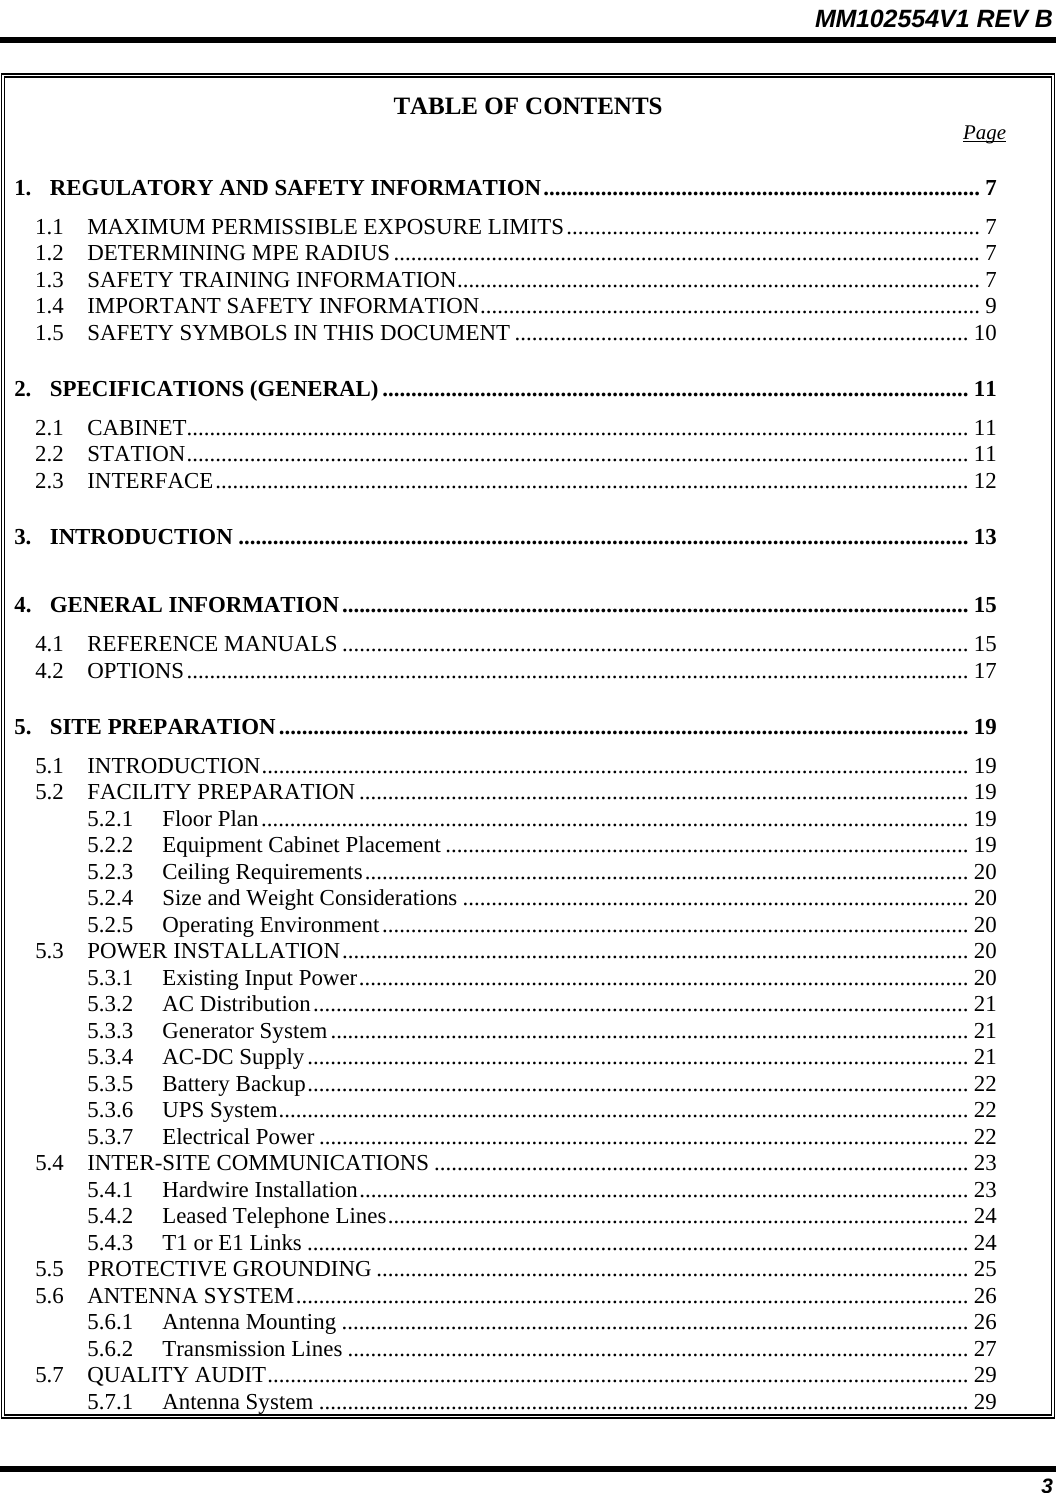 MM102554V1 REV B  3 TABLE OF CONTENTS  Page 1. REGULATORY AND SAFETY INFORMATION............................................................................ 7 1.1  MAXIMUM PERMISSIBLE EXPOSURE LIMITS........................................................................ 7 1.2 DETERMINING MPE RADIUS......................................................................................................7 1.3  SAFETY TRAINING INFORMATION........................................................................................... 7 1.4  IMPORTANT SAFETY INFORMATION....................................................................................... 9 1.5  SAFETY SYMBOLS IN THIS DOCUMENT ............................................................................... 10 2. SPECIFICATIONS (GENERAL)...................................................................................................... 11 2.1 CABINET........................................................................................................................................ 11 2.2 STATION........................................................................................................................................ 11 2.3 INTERFACE................................................................................................................................... 12 3. INTRODUCTION ............................................................................................................................... 13 4. GENERAL INFORMATION............................................................................................................. 15 4.1 REFERENCE MANUALS ............................................................................................................. 15 4.2 OPTIONS........................................................................................................................................ 17 5. SITE PREPARATION........................................................................................................................ 19 5.1 INTRODUCTION........................................................................................................................... 19 5.2 FACILITY PREPARATION .......................................................................................................... 19 5.2.1 Floor Plan........................................................................................................................... 19 5.2.2  Equipment Cabinet Placement ........................................................................................... 19 5.2.3 Ceiling Requirements......................................................................................................... 20 5.2.4  Size and Weight Considerations ........................................................................................ 20 5.2.5 Operating Environment...................................................................................................... 20 5.3 POWER INSTALLATION............................................................................................................. 20 5.3.1  Existing Input Power.......................................................................................................... 20 5.3.2 AC Distribution.................................................................................................................. 21 5.3.3 Generator System............................................................................................................... 21 5.3.4 AC-DC Supply................................................................................................................... 21 5.3.5 Battery Backup................................................................................................................... 22 5.3.6 UPS System........................................................................................................................ 22 5.3.7 Electrical Power ................................................................................................................. 22 5.4 INTER-SITE COMMUNICATIONS ............................................................................................. 23 5.4.1 Hardwire Installation.......................................................................................................... 23 5.4.2  Leased Telephone Lines..................................................................................................... 24 5.4.3  T1 or E1 Links ................................................................................................................... 24 5.5 PROTECTIVE GROUNDING ....................................................................................................... 25 5.6 ANTENNA SYSTEM..................................................................................................................... 26 5.6.1 Antenna Mounting ............................................................................................................. 26 5.6.2 Transmission Lines ............................................................................................................ 27 5.7 QUALITY AUDIT.......................................................................................................................... 29 5.7.1 Antenna System ................................................................................................................. 29 